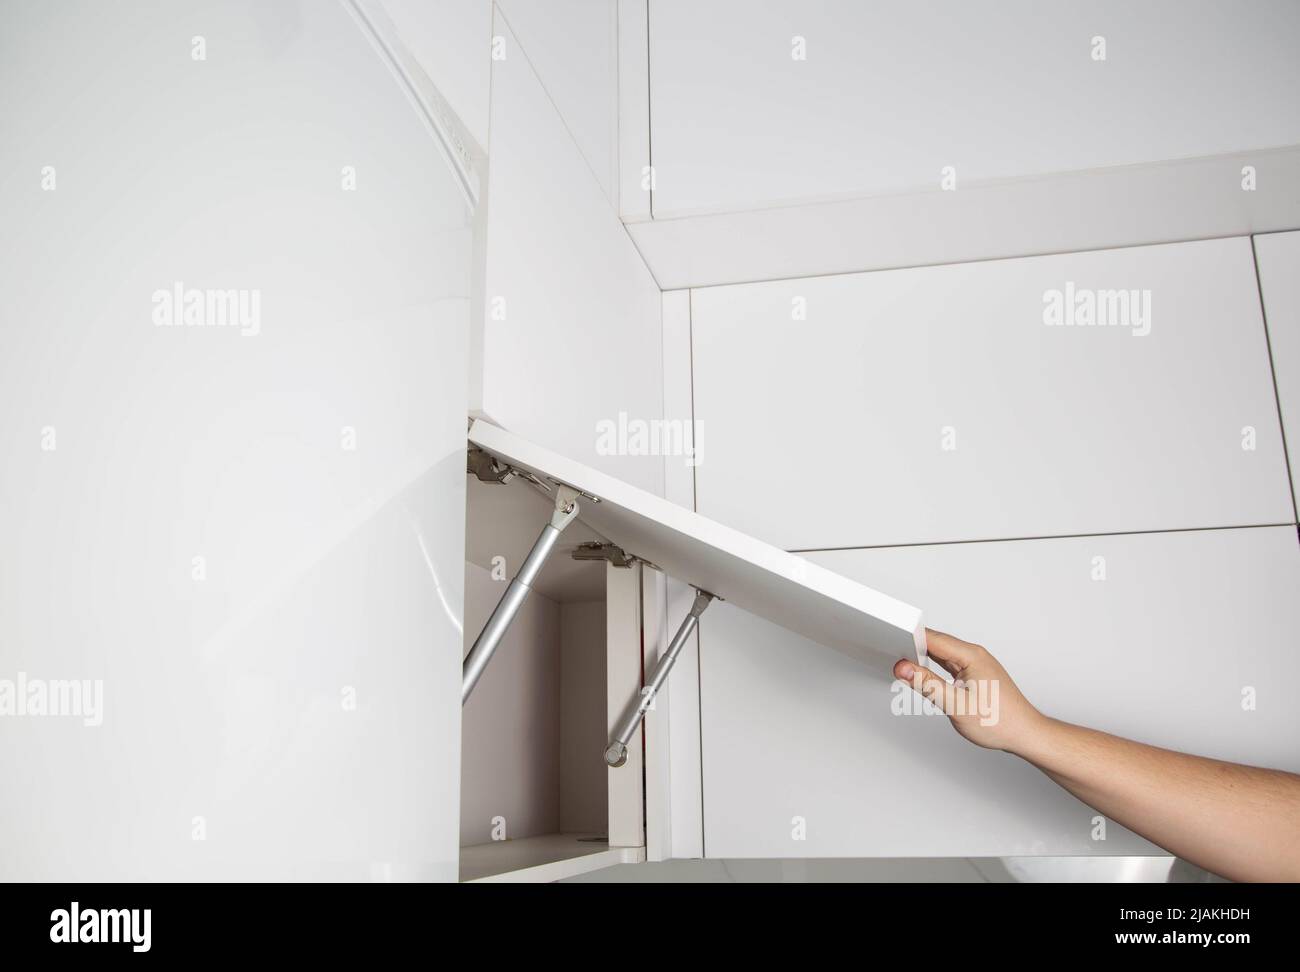 A furniture assembly worker holds a retractable gas spring to open and support a cabinet door. Modern furniture fittings Stock Photo